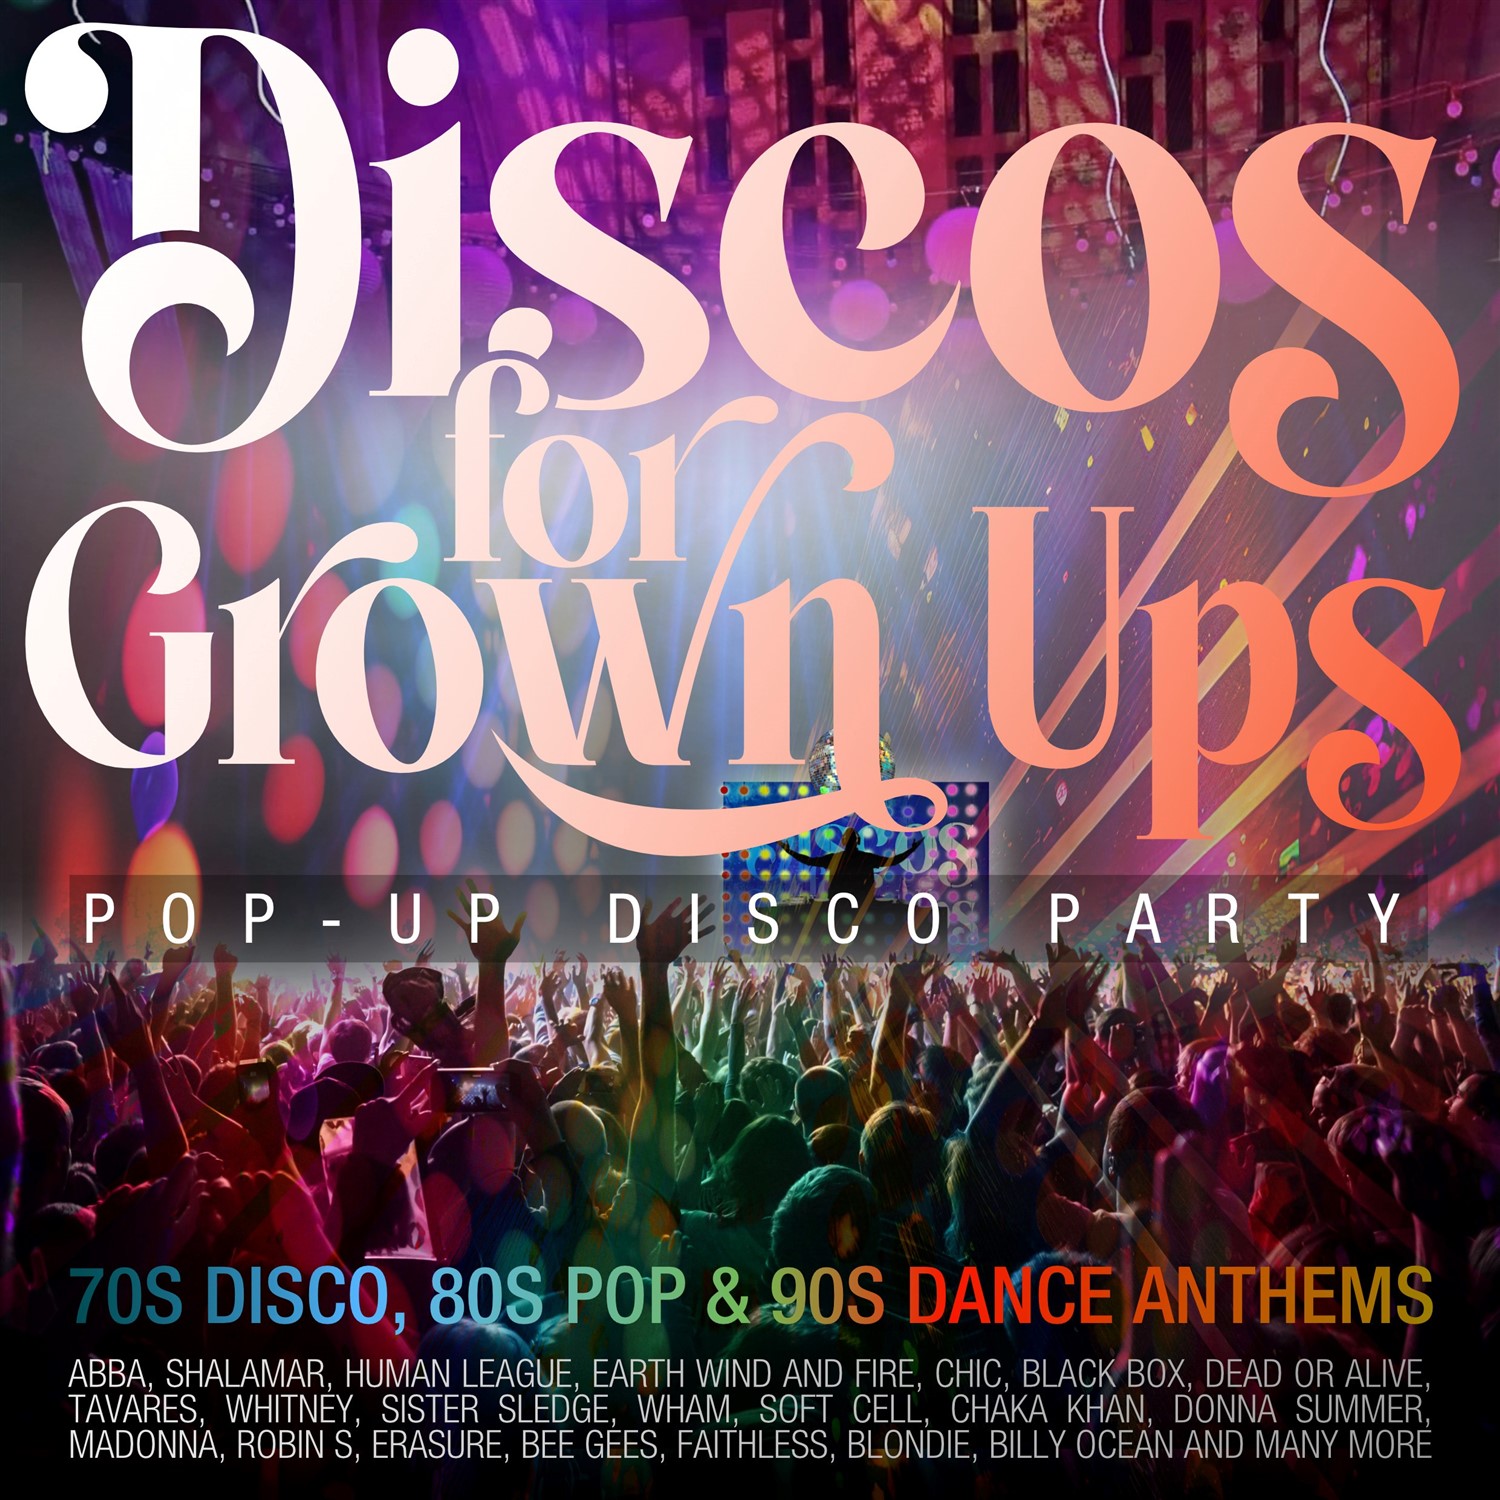 Discos for Grown Ups Pop-up Disco Party on Mar 29, 20:00@Sutton Coldfield Town Hall - General Admission - Buy tickets and Get information on Sutton Coldfield Town Hall 